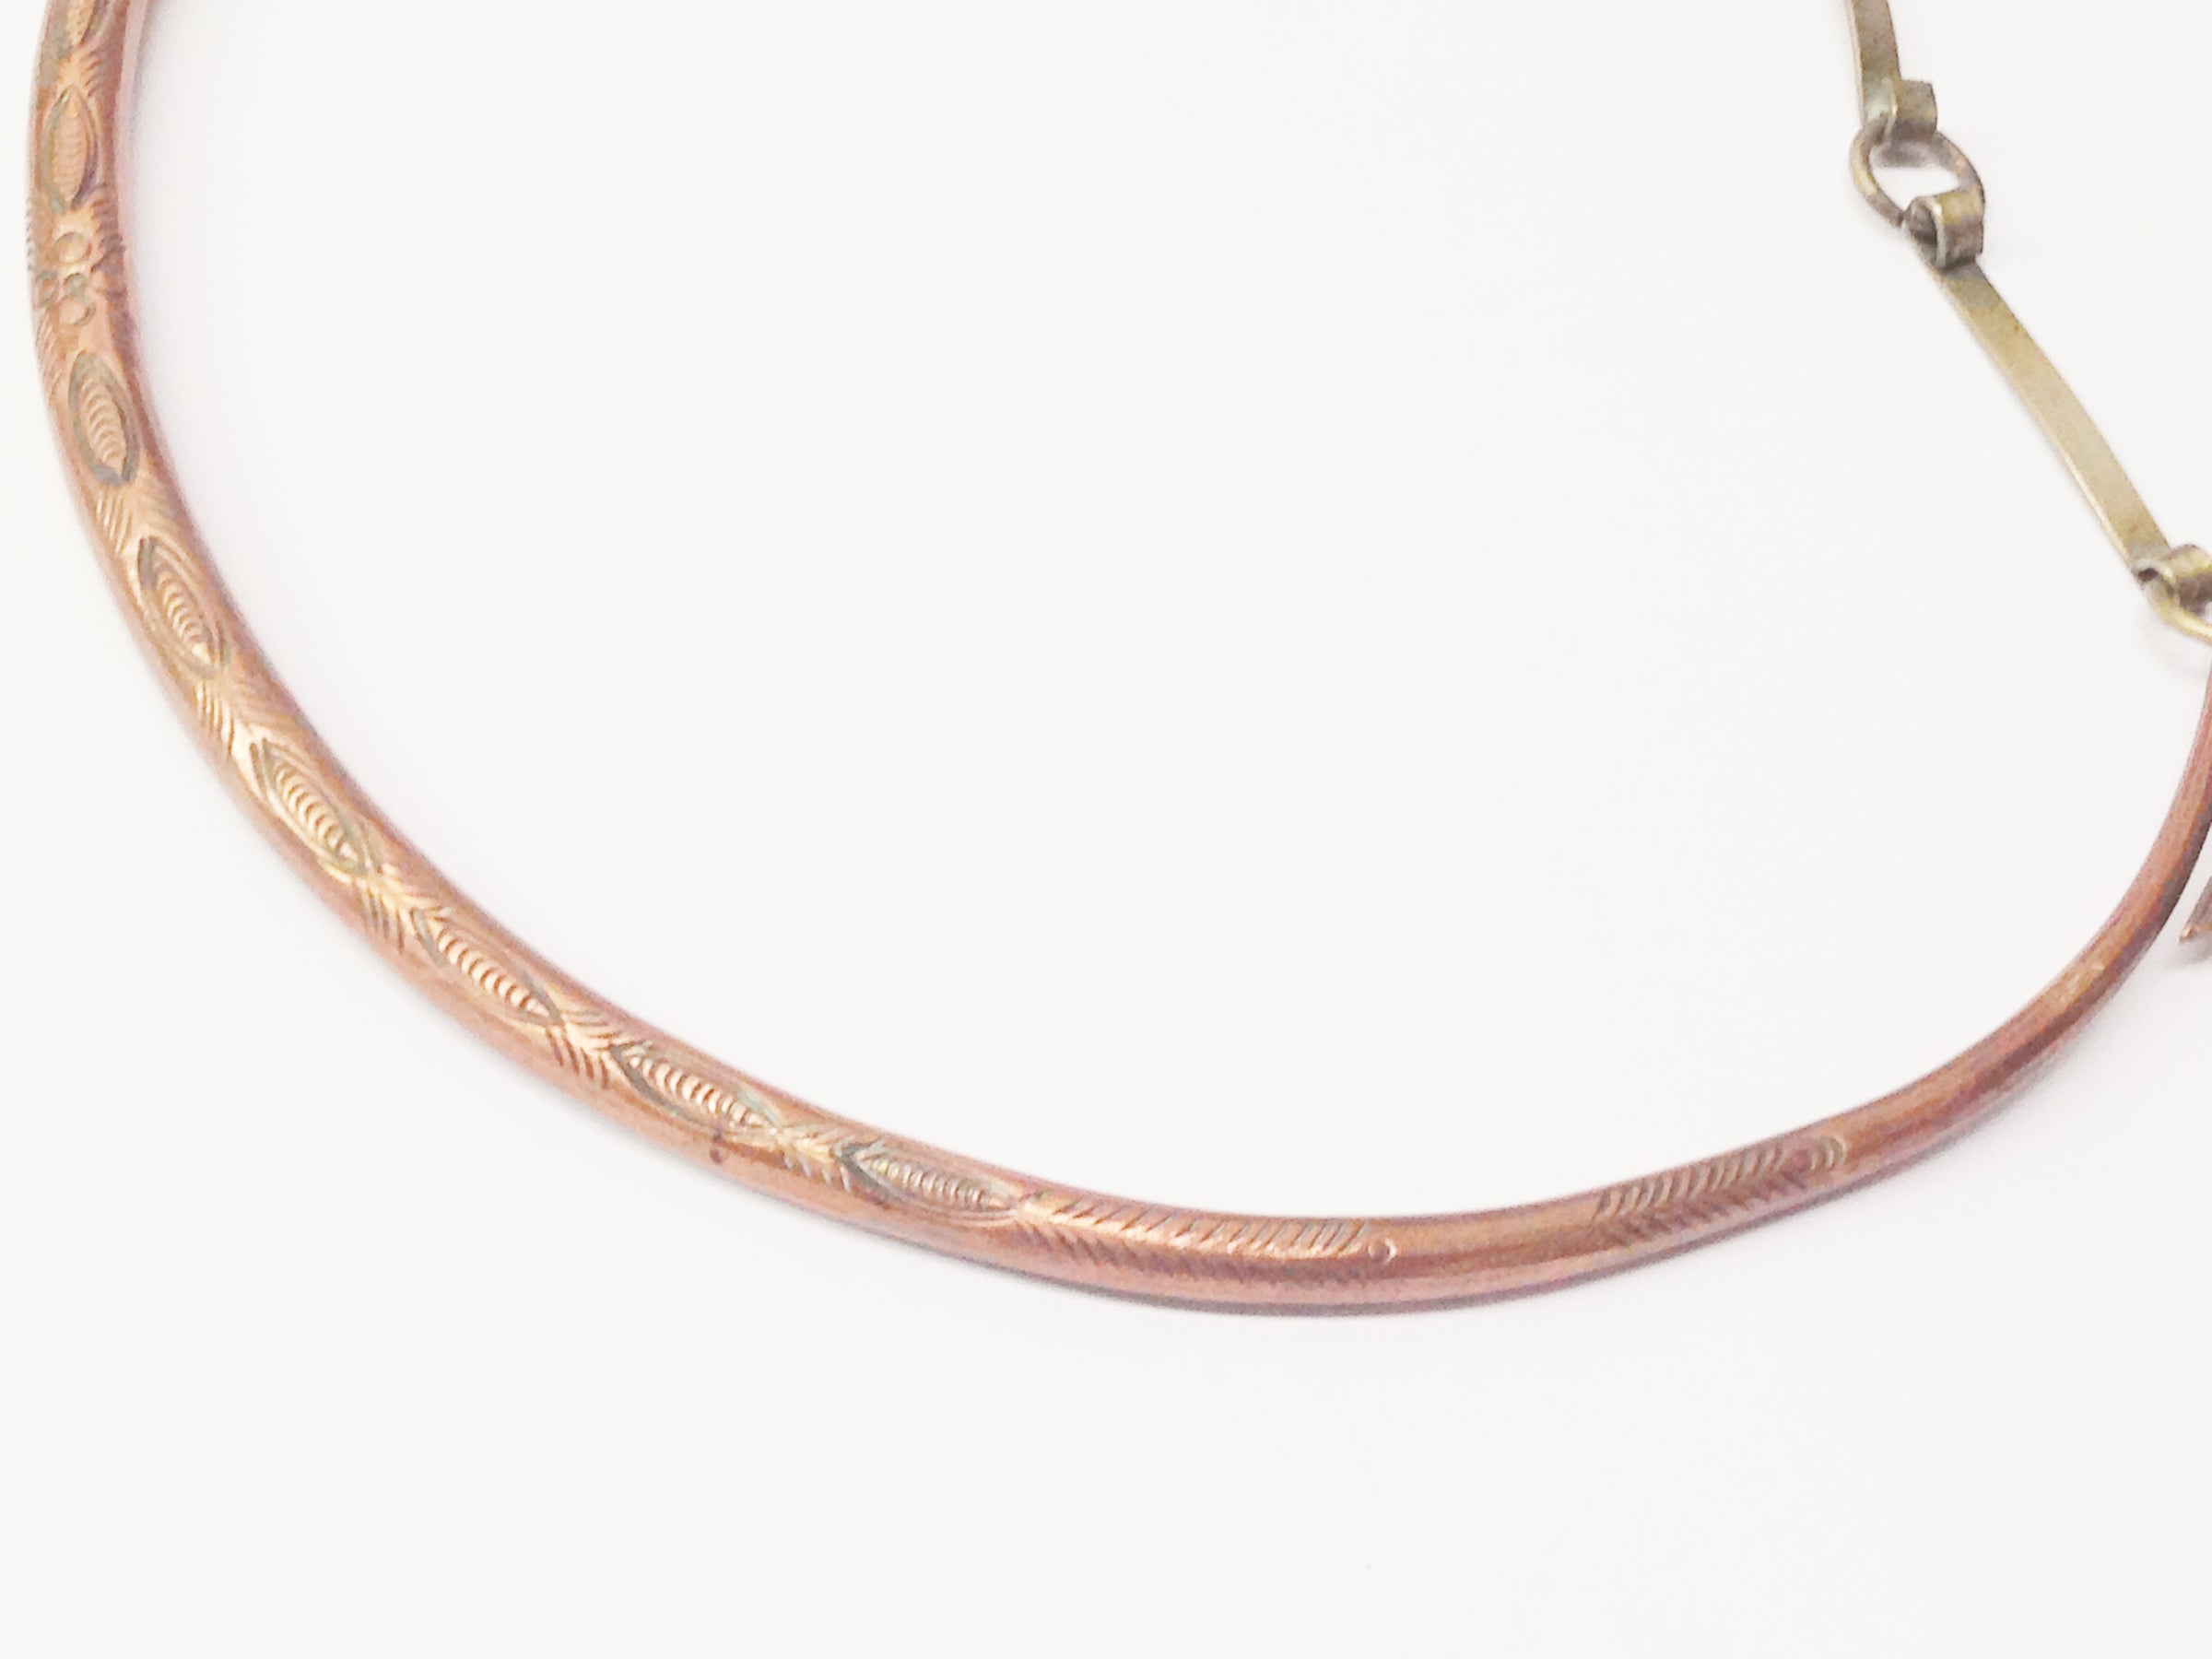 Antique Stamped Copper Tribal Choker Necklace - Hers and His Treasures